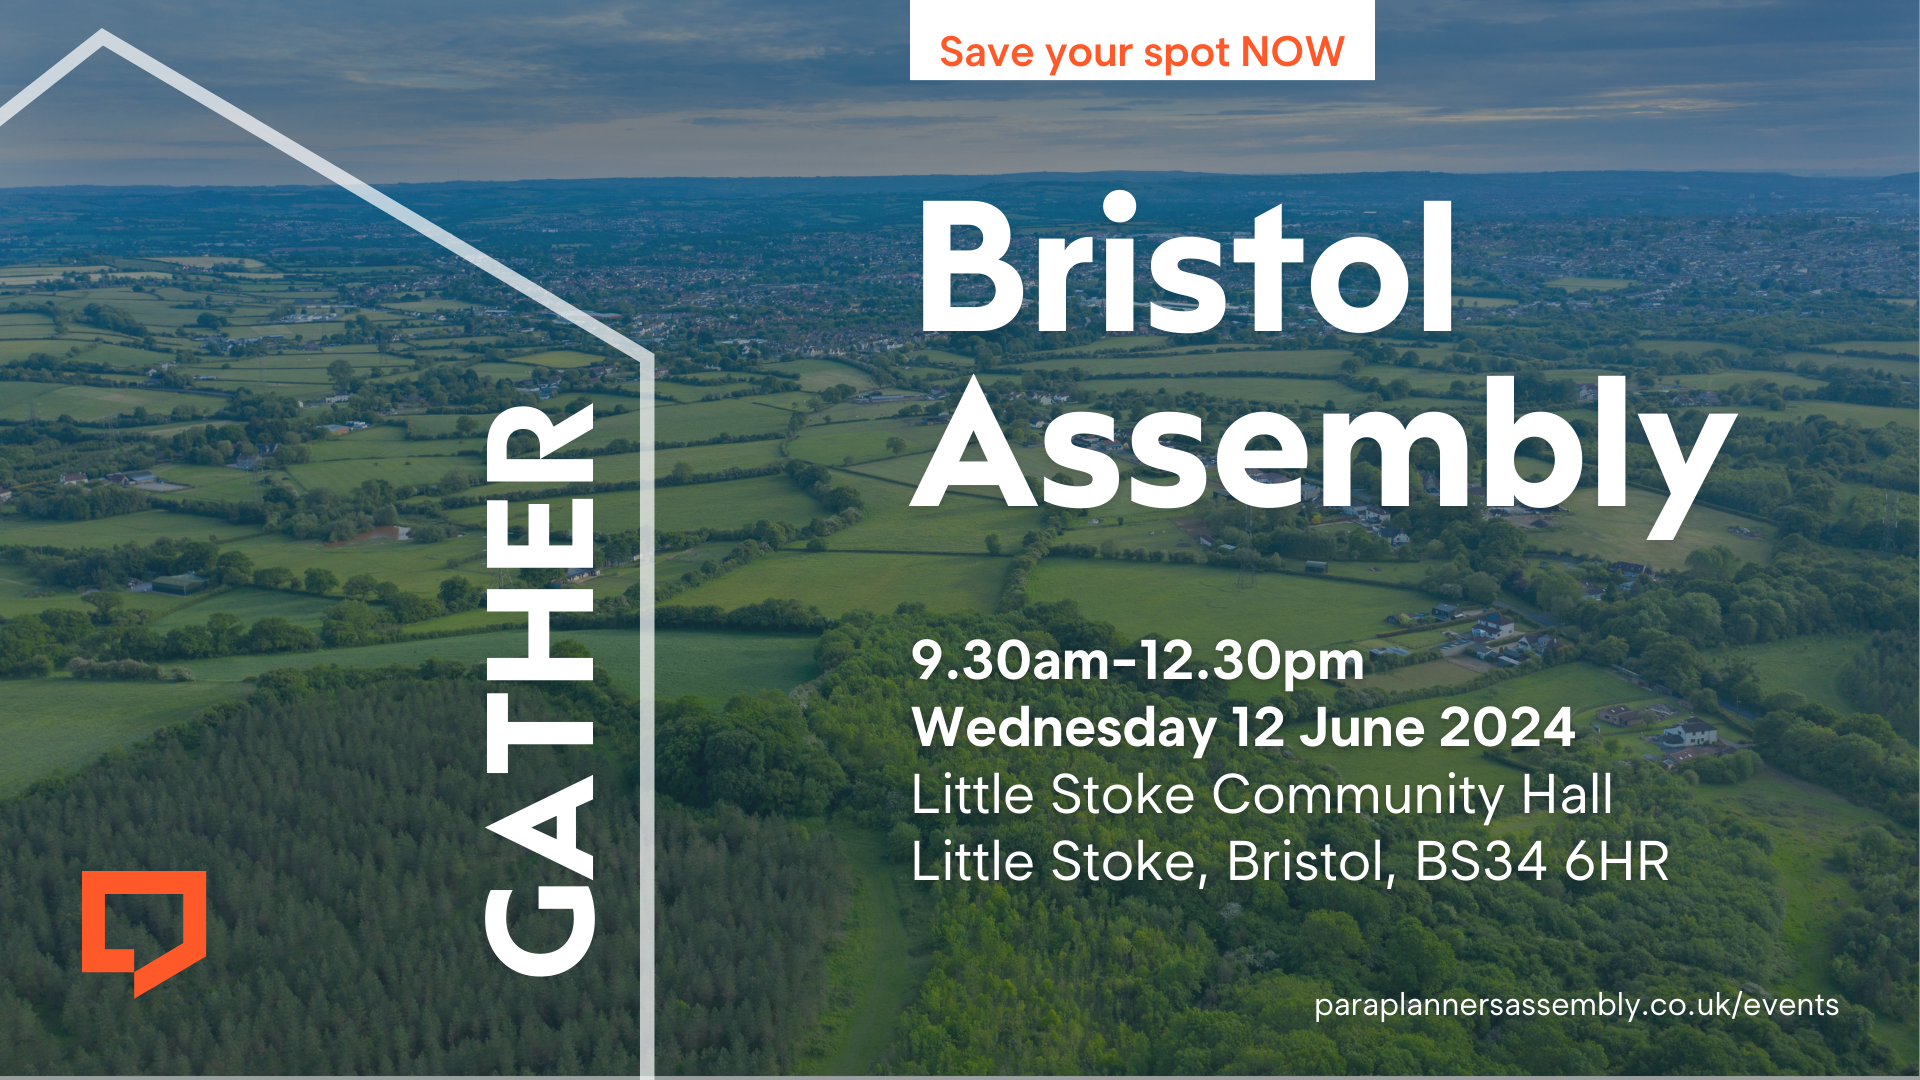 Save your spot now. Bristol Assembly. 9.30am-12.30pm. Wednesday 12 June 2024 at Little Stoke Community Hall, Little Stoke, Bristol, BS34 6HR. Visit paraplanners-assemblty.co.uk/events.